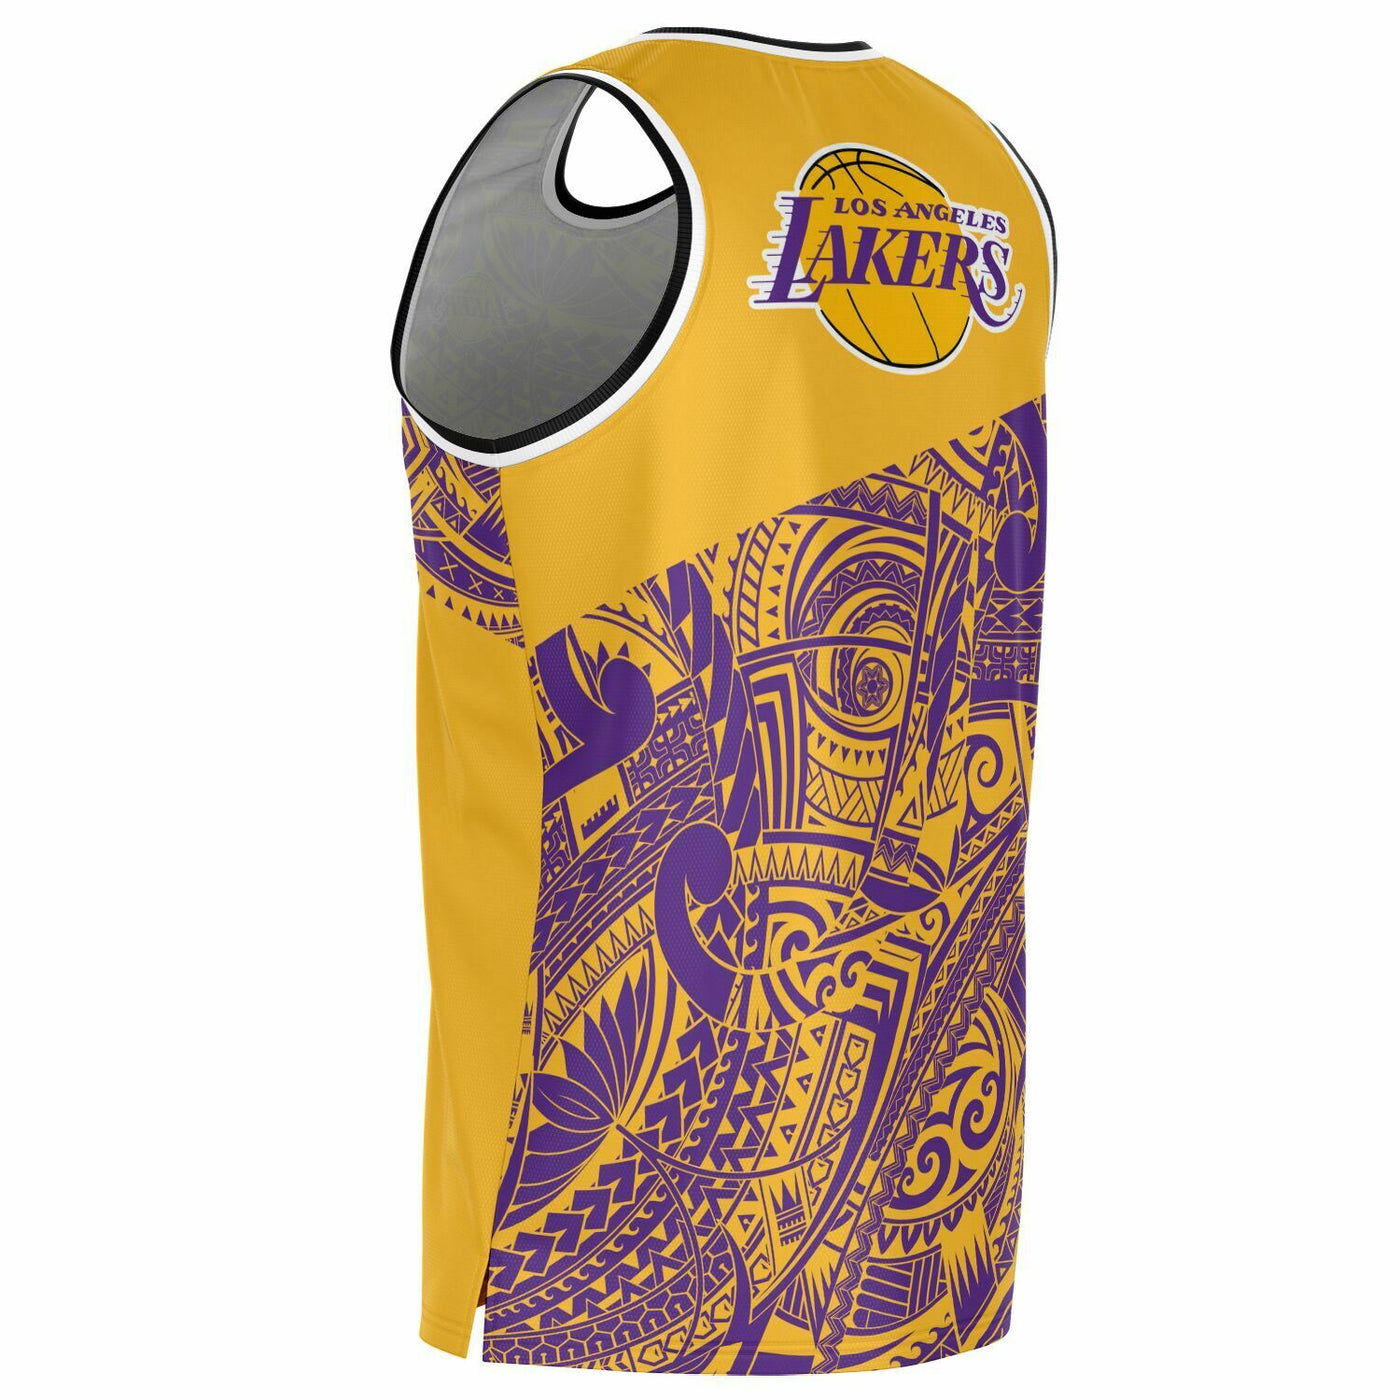 LAKERS CITY EDITION - FULL SUBLIMATION JERSEY - LAKERS (WHITE